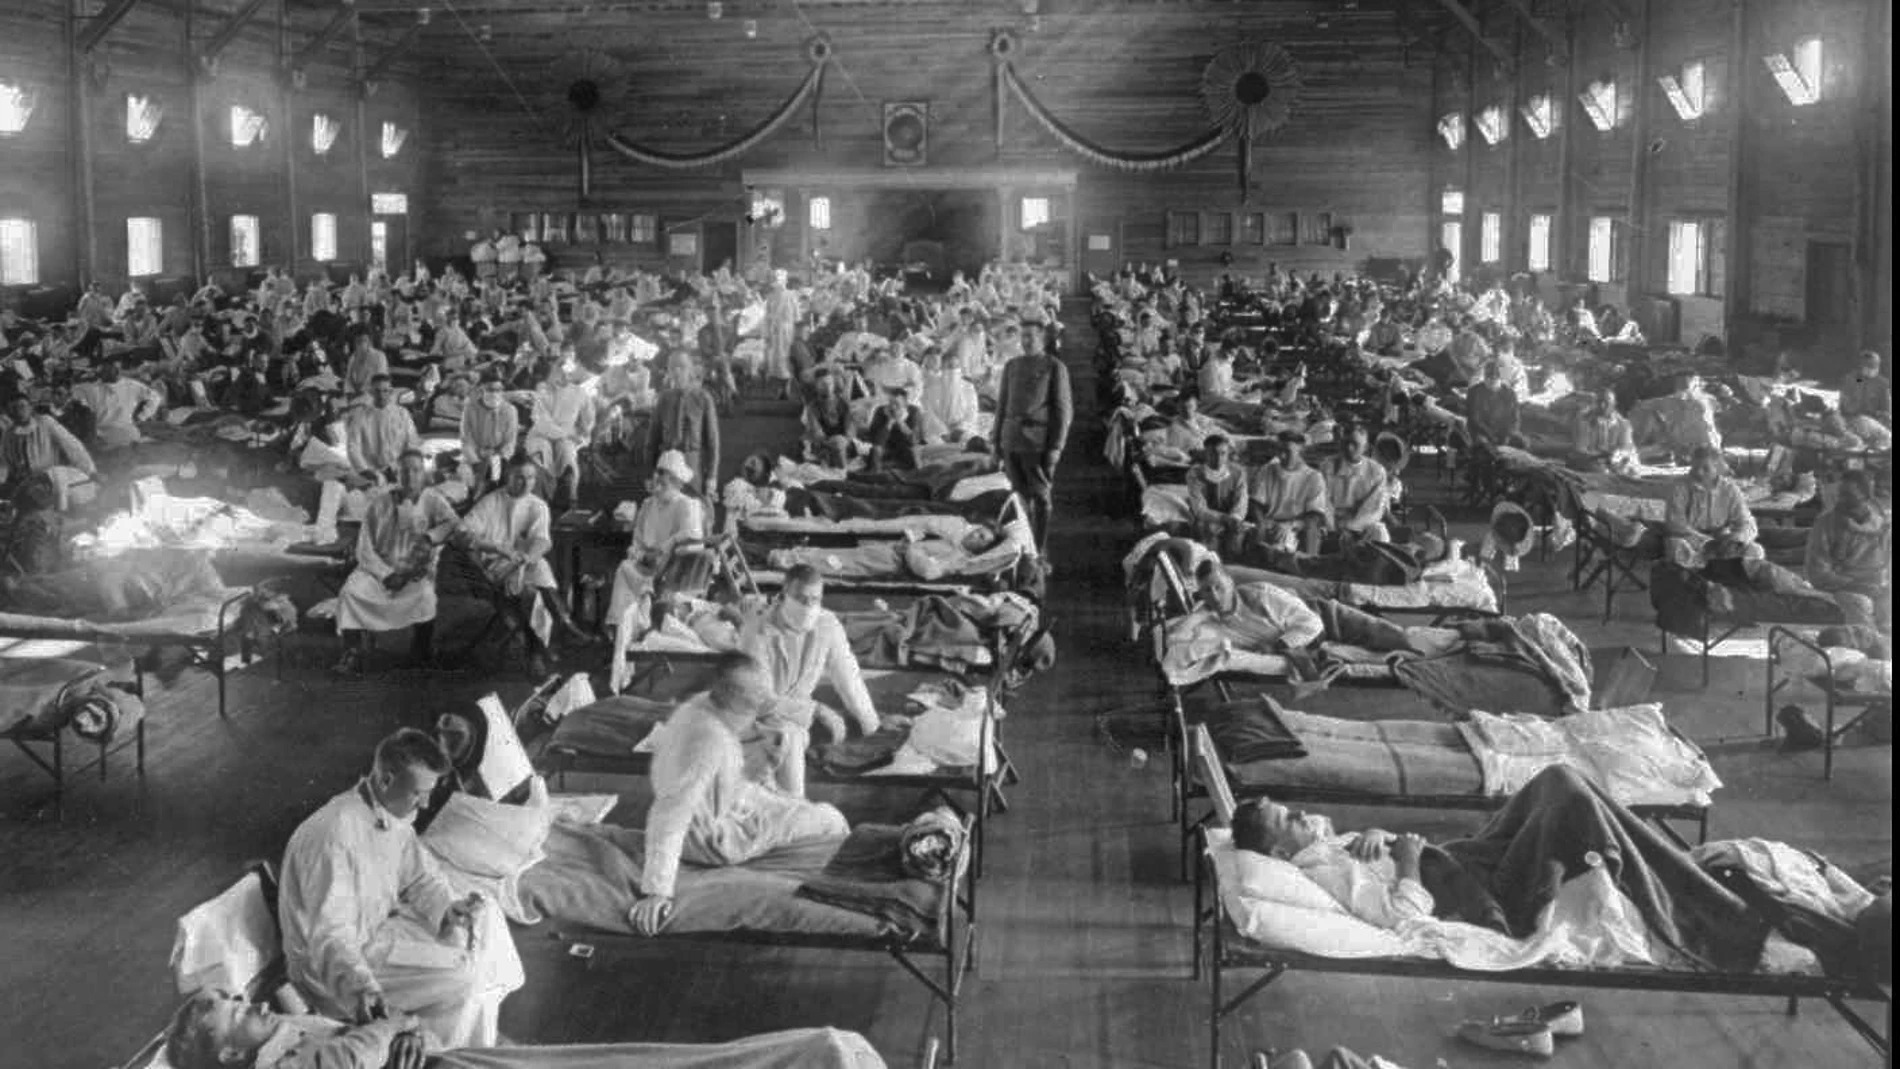 ** FILE ** Influenza victims crowd into an emergency hospital near Fort Riley, Kansas in this 1918 file photo. The 1918 Spanish flu pandemic killed at least 20 million people worldwide and officials say that if the next pandemic resemblers the birdlike 1918 Spanish flu, to 1.9 million Americans could die. (AP Photo/National Museum of Health)